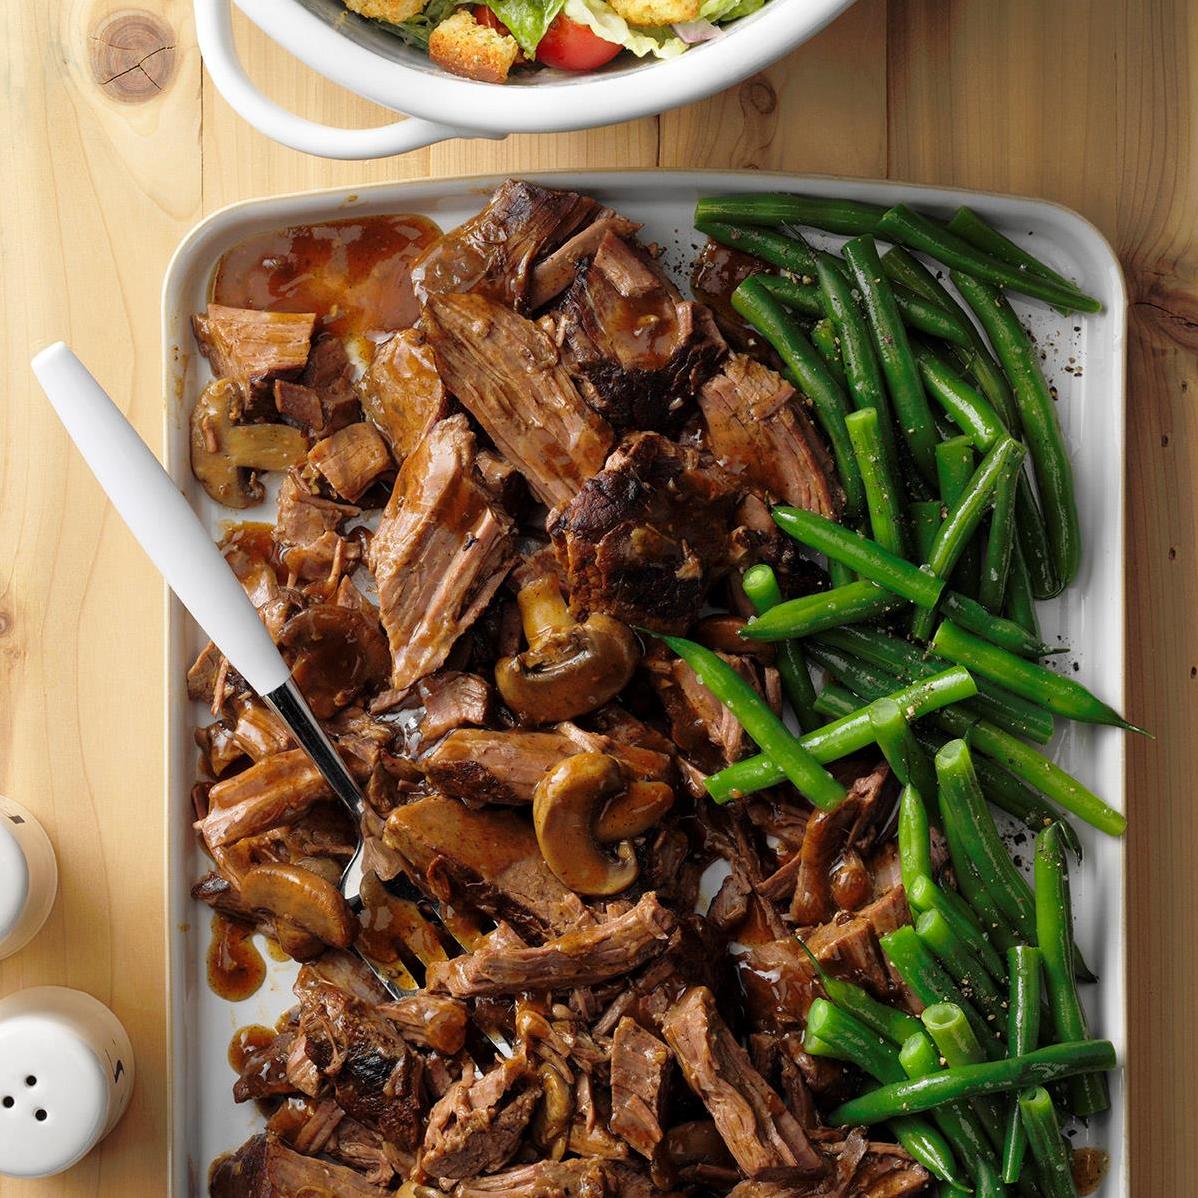  Fall apart tender beef, cooked slow and low in a rich coffee-infused broth.